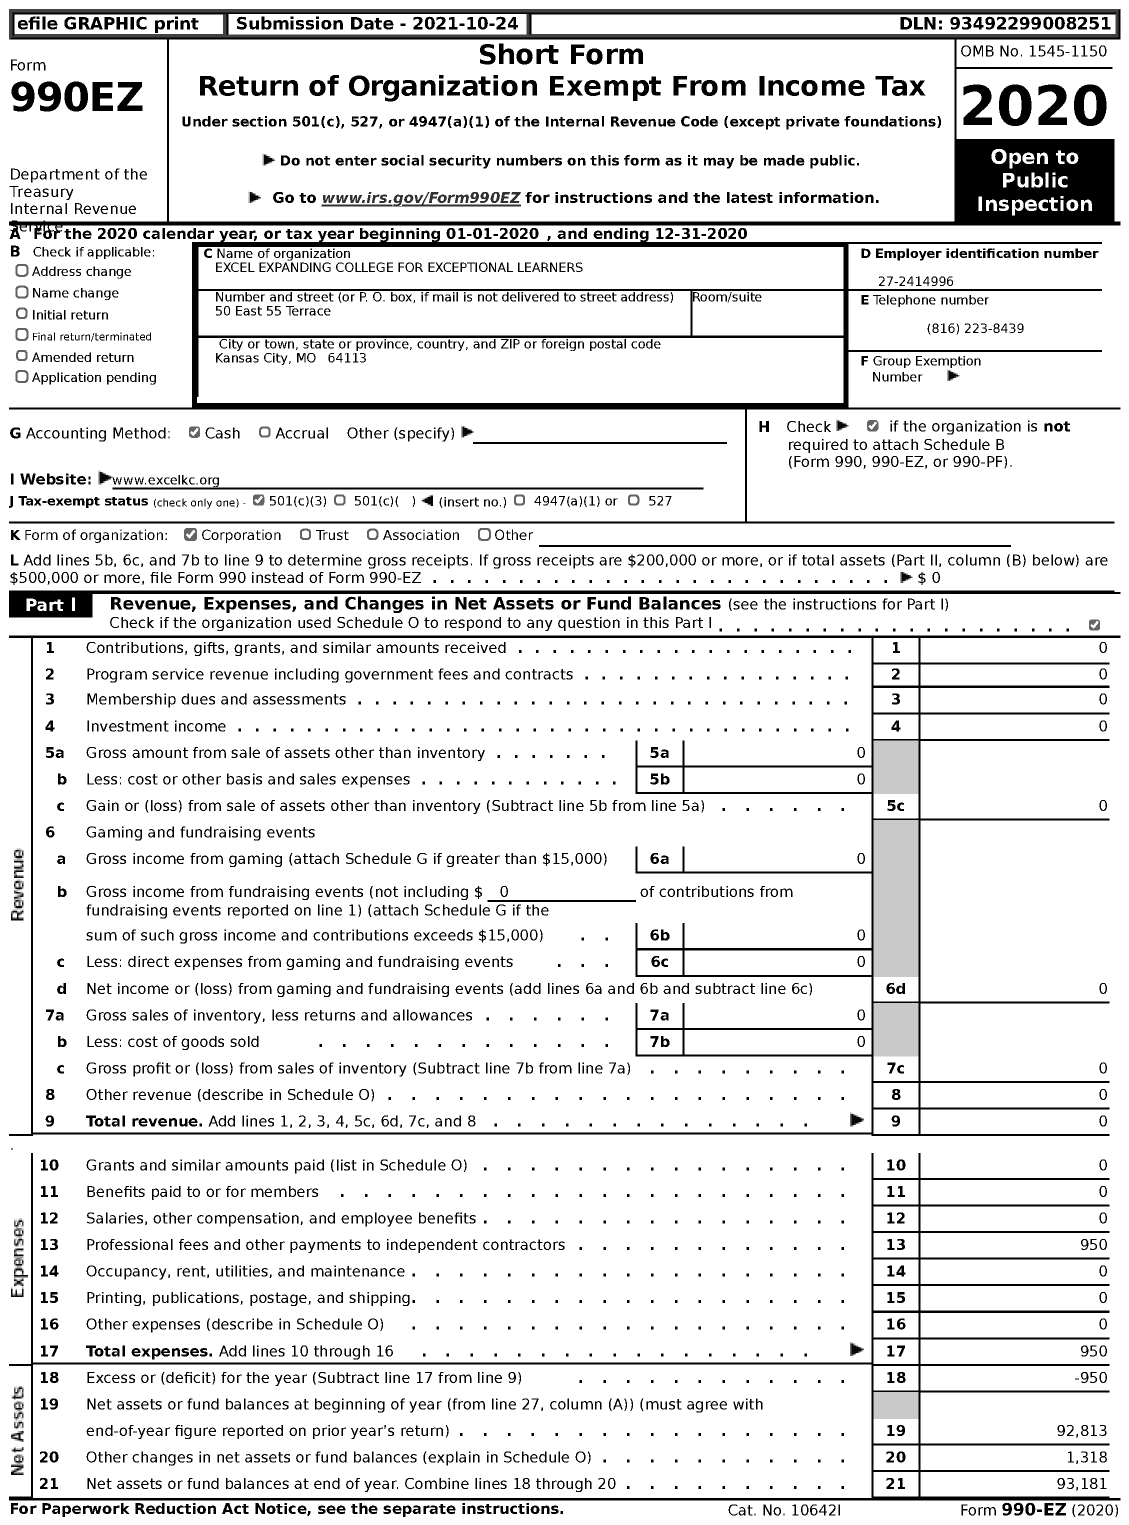 Image of first page of 2020 Form 990EZ for Excel Expanding College for Exceptional Learners